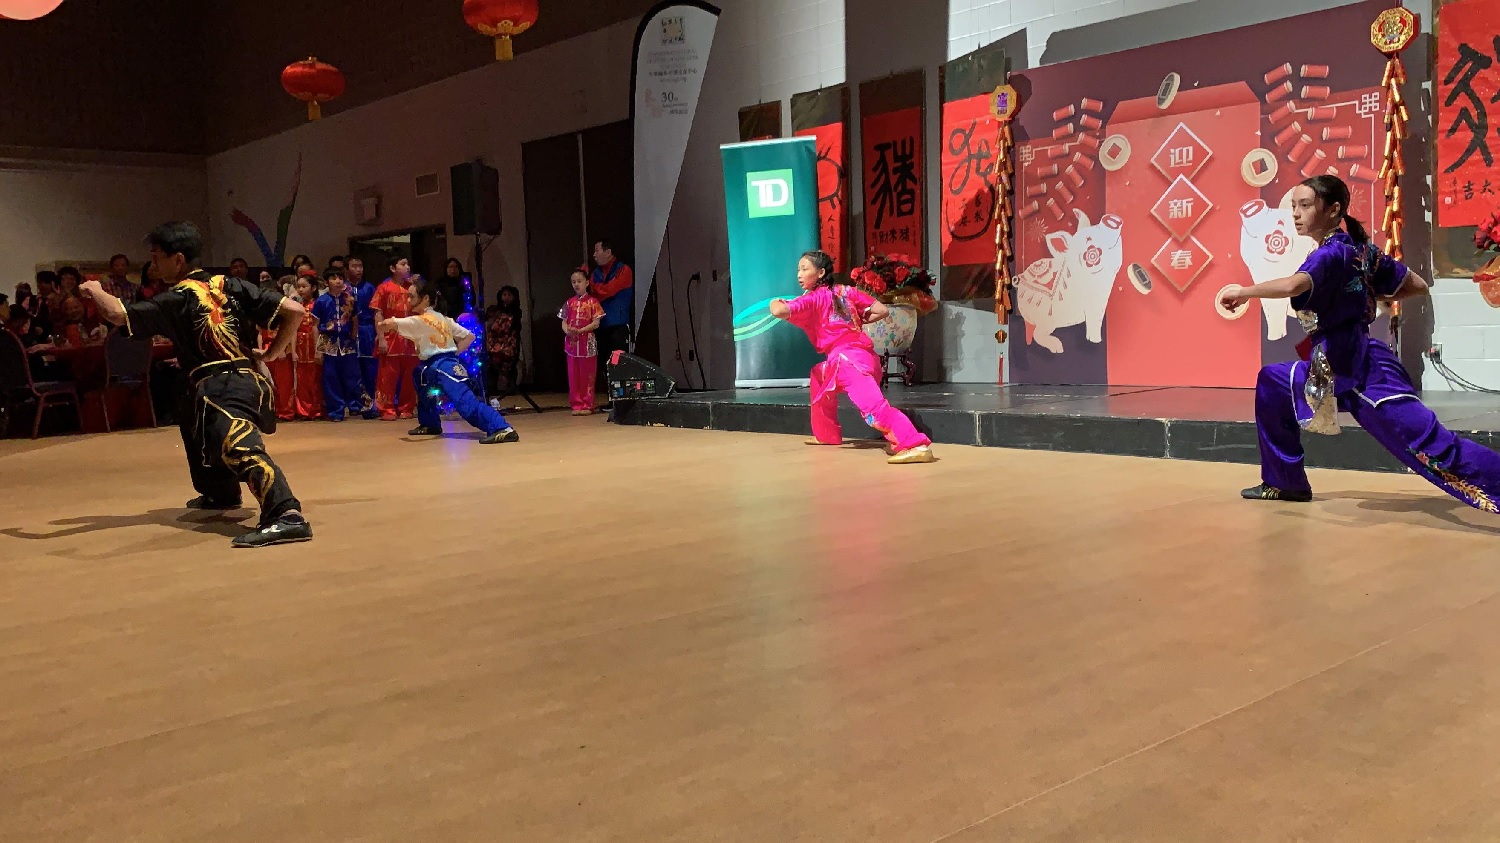 wayland-li-wushu-year-of-the-pig-dinner-chinese-cultural-centre-2019-04.jpg